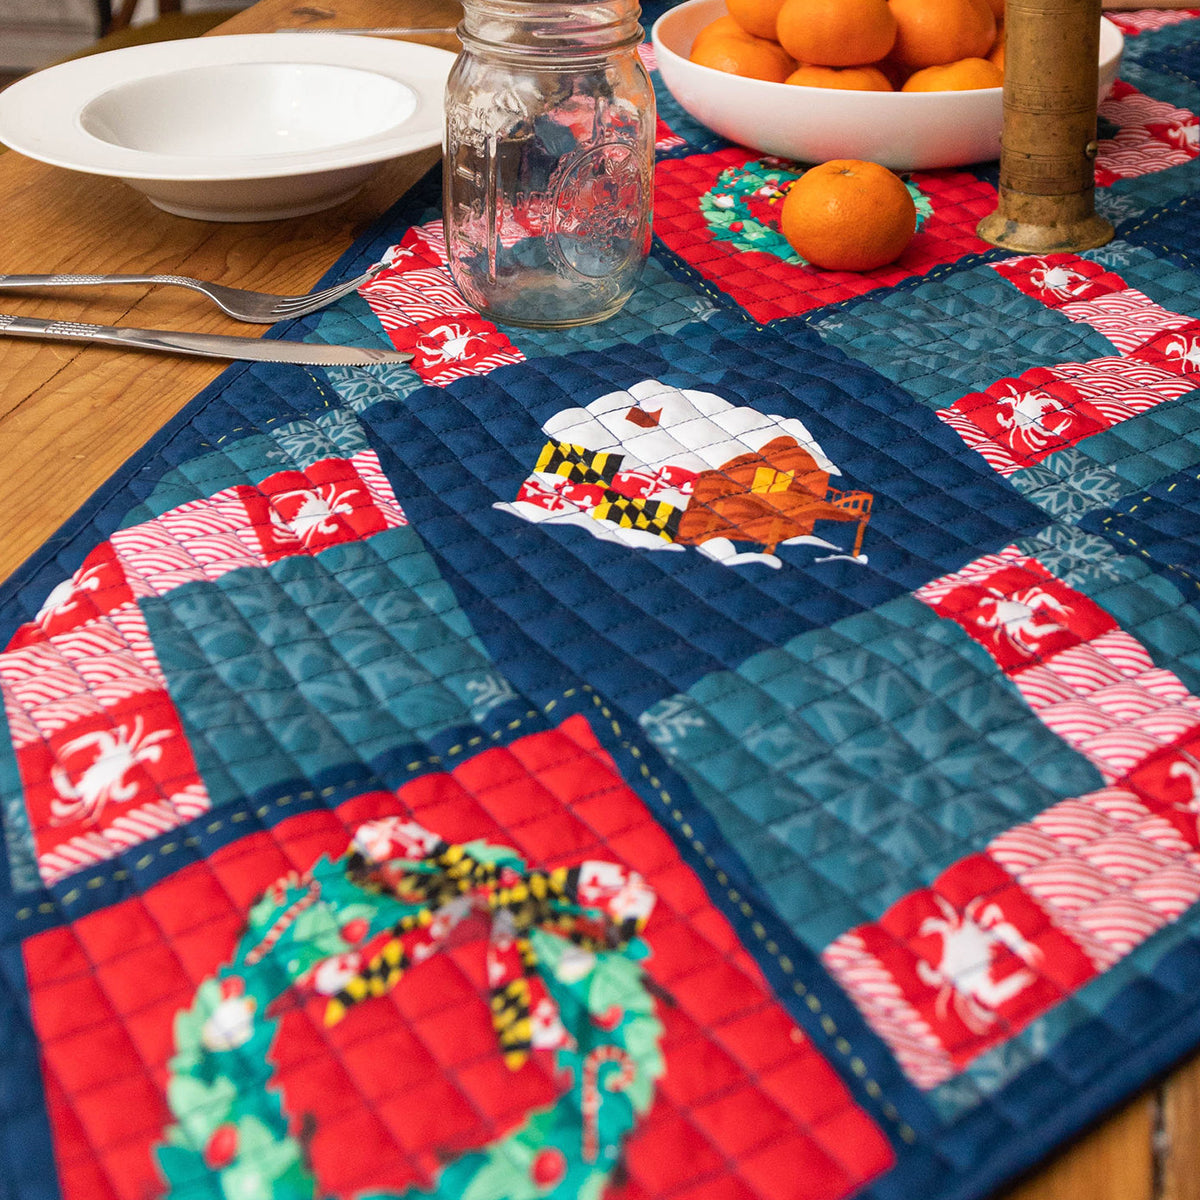 Home Sweet Home in Maryland (Quilted) / Table Runner - Route One Apparel